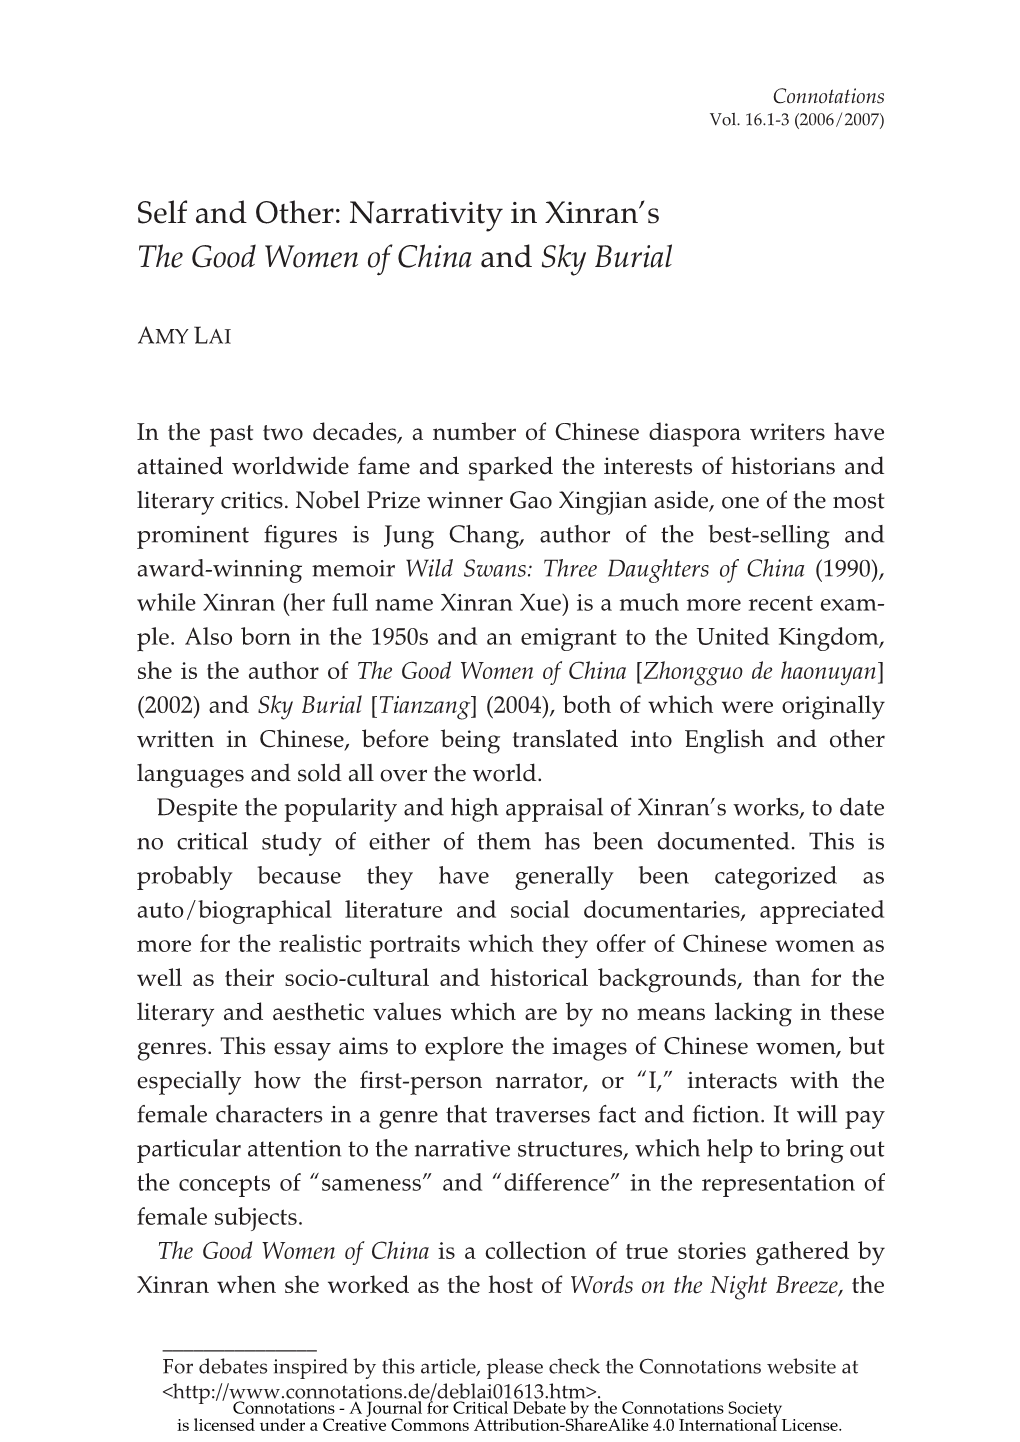 Narrativity in Xinran's the Good Women of China and Sky Burial